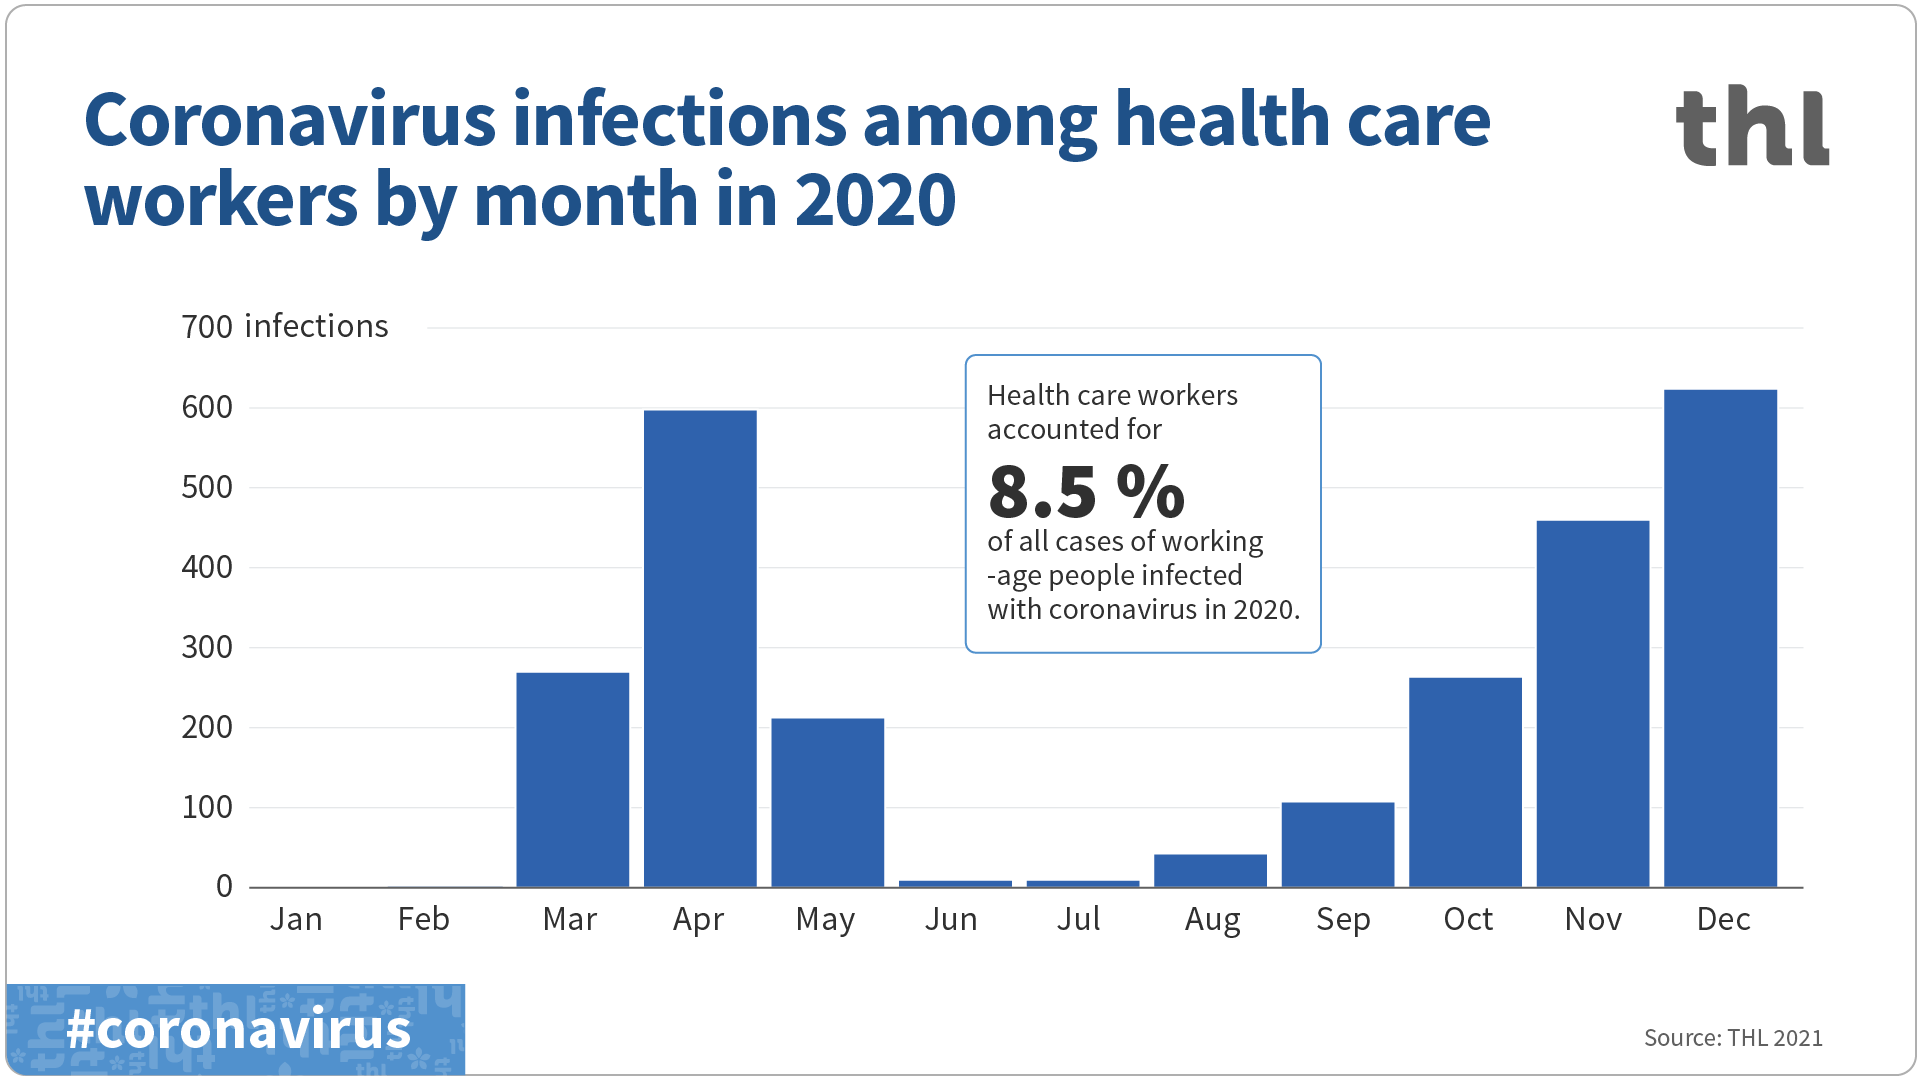 Infographic on coronavirus infections among health care workers by month 2020. Content explained in the text.